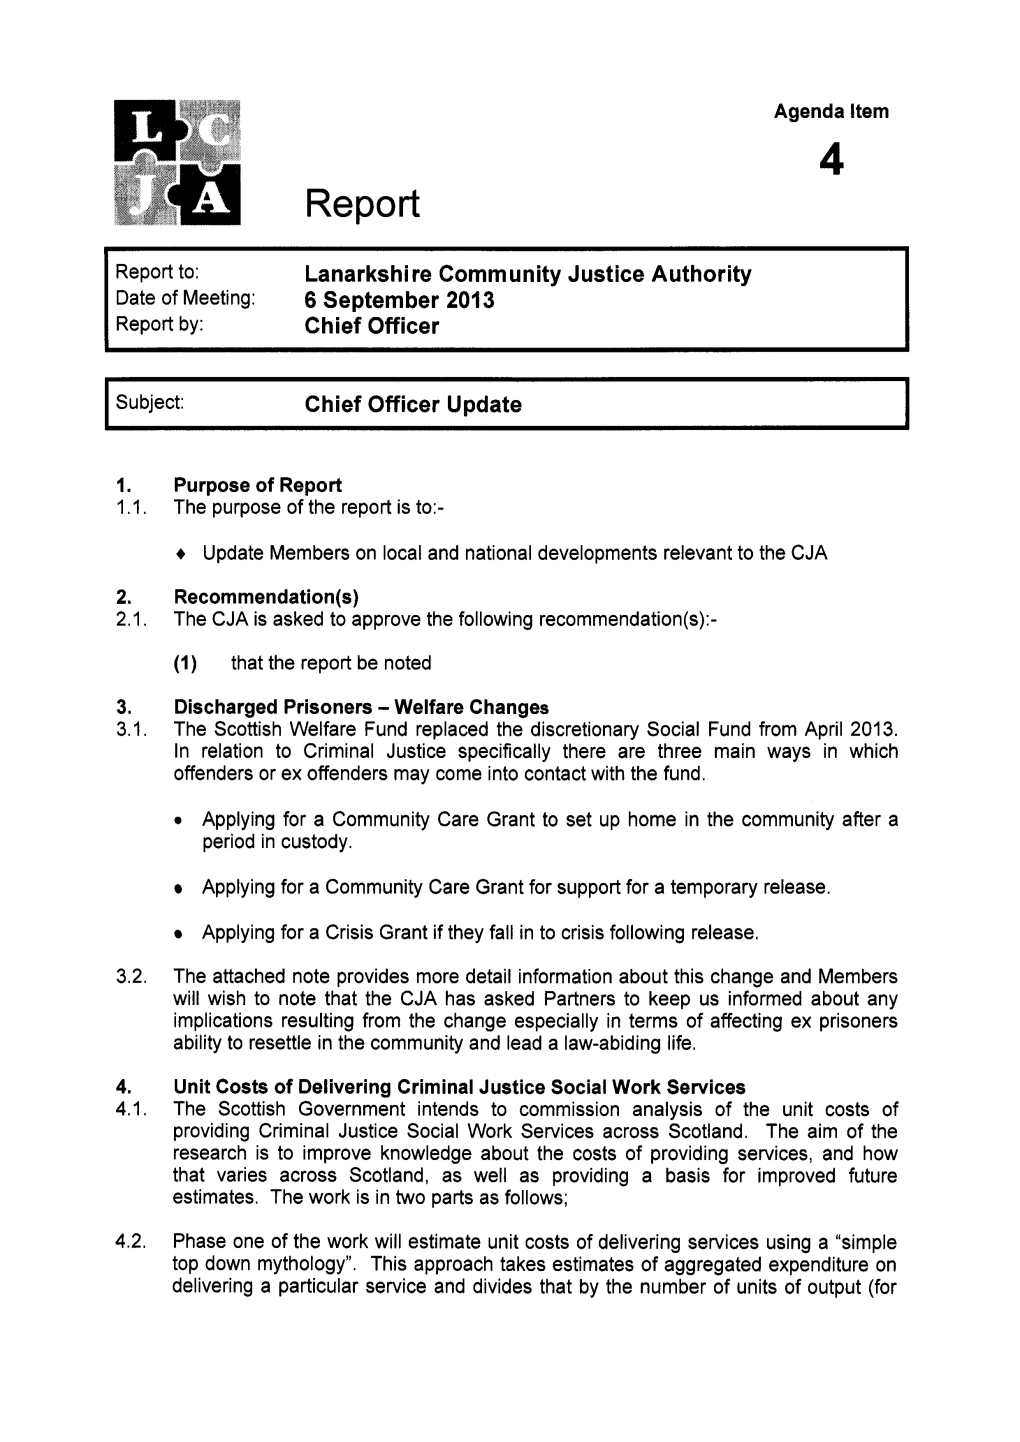 Lanarkshire Community Justice Authority 6 September 2013 C H Ief Officer Chief Officer Update